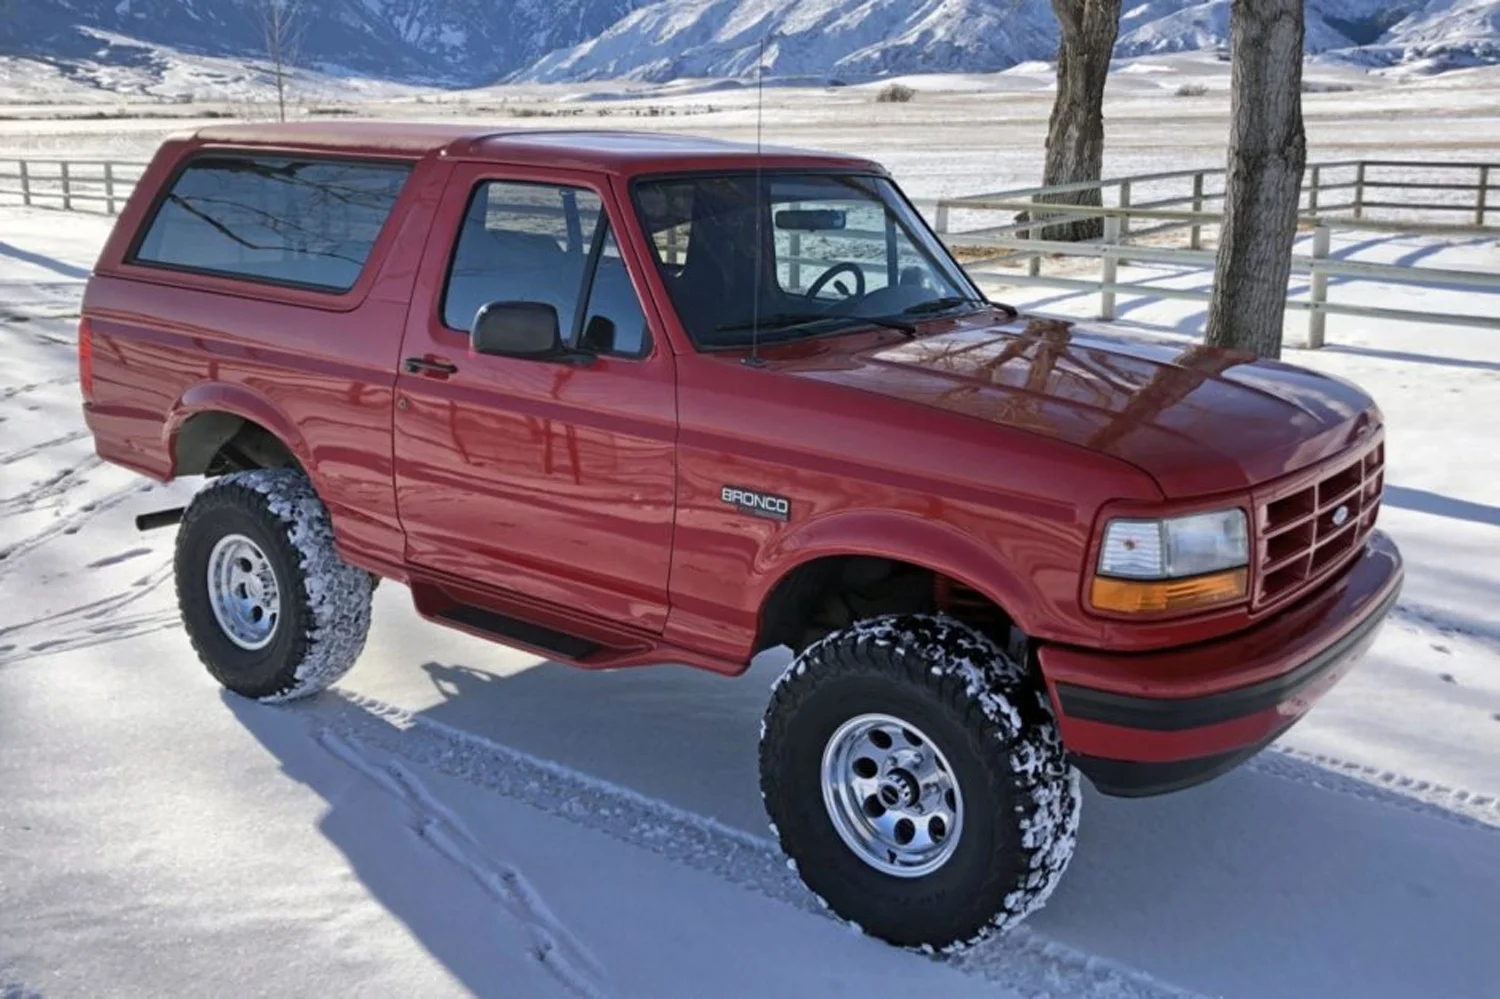 1995 Ford Bronco IS One Of The Cleanest You Will Find: Video